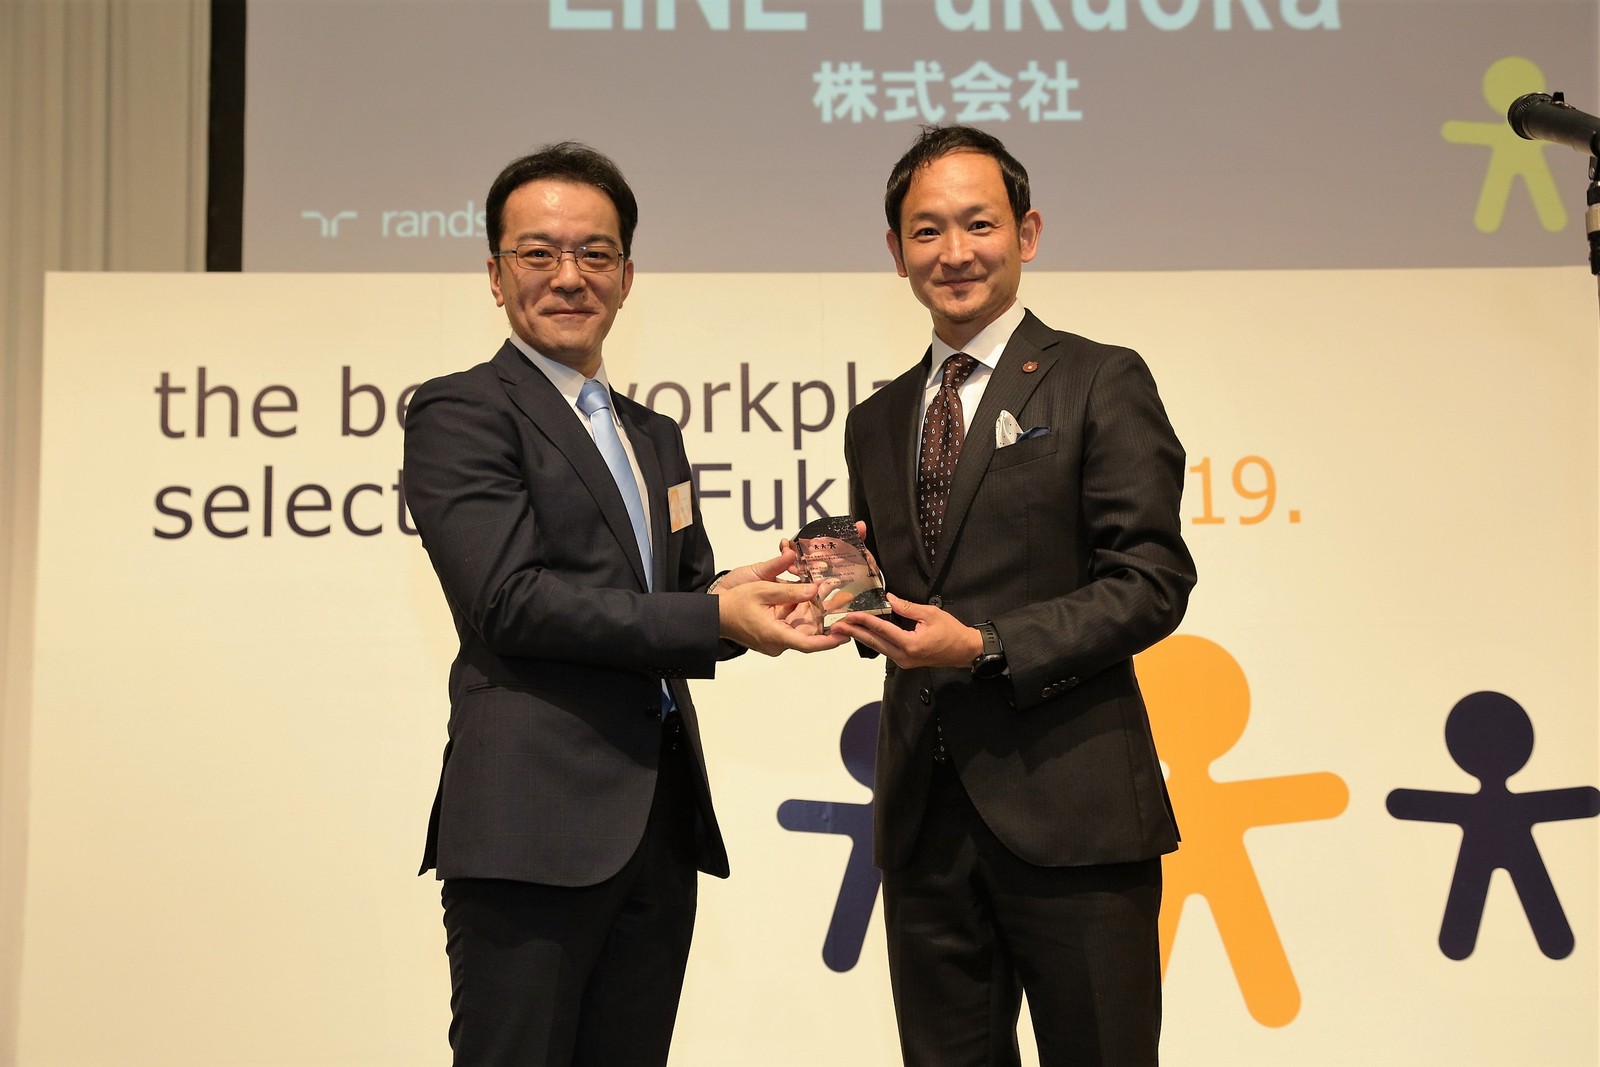 LINE Fukuoka ranked No.1 in ”The best workplaces selected in Fukuoka 2019”survey. サムネイル画像